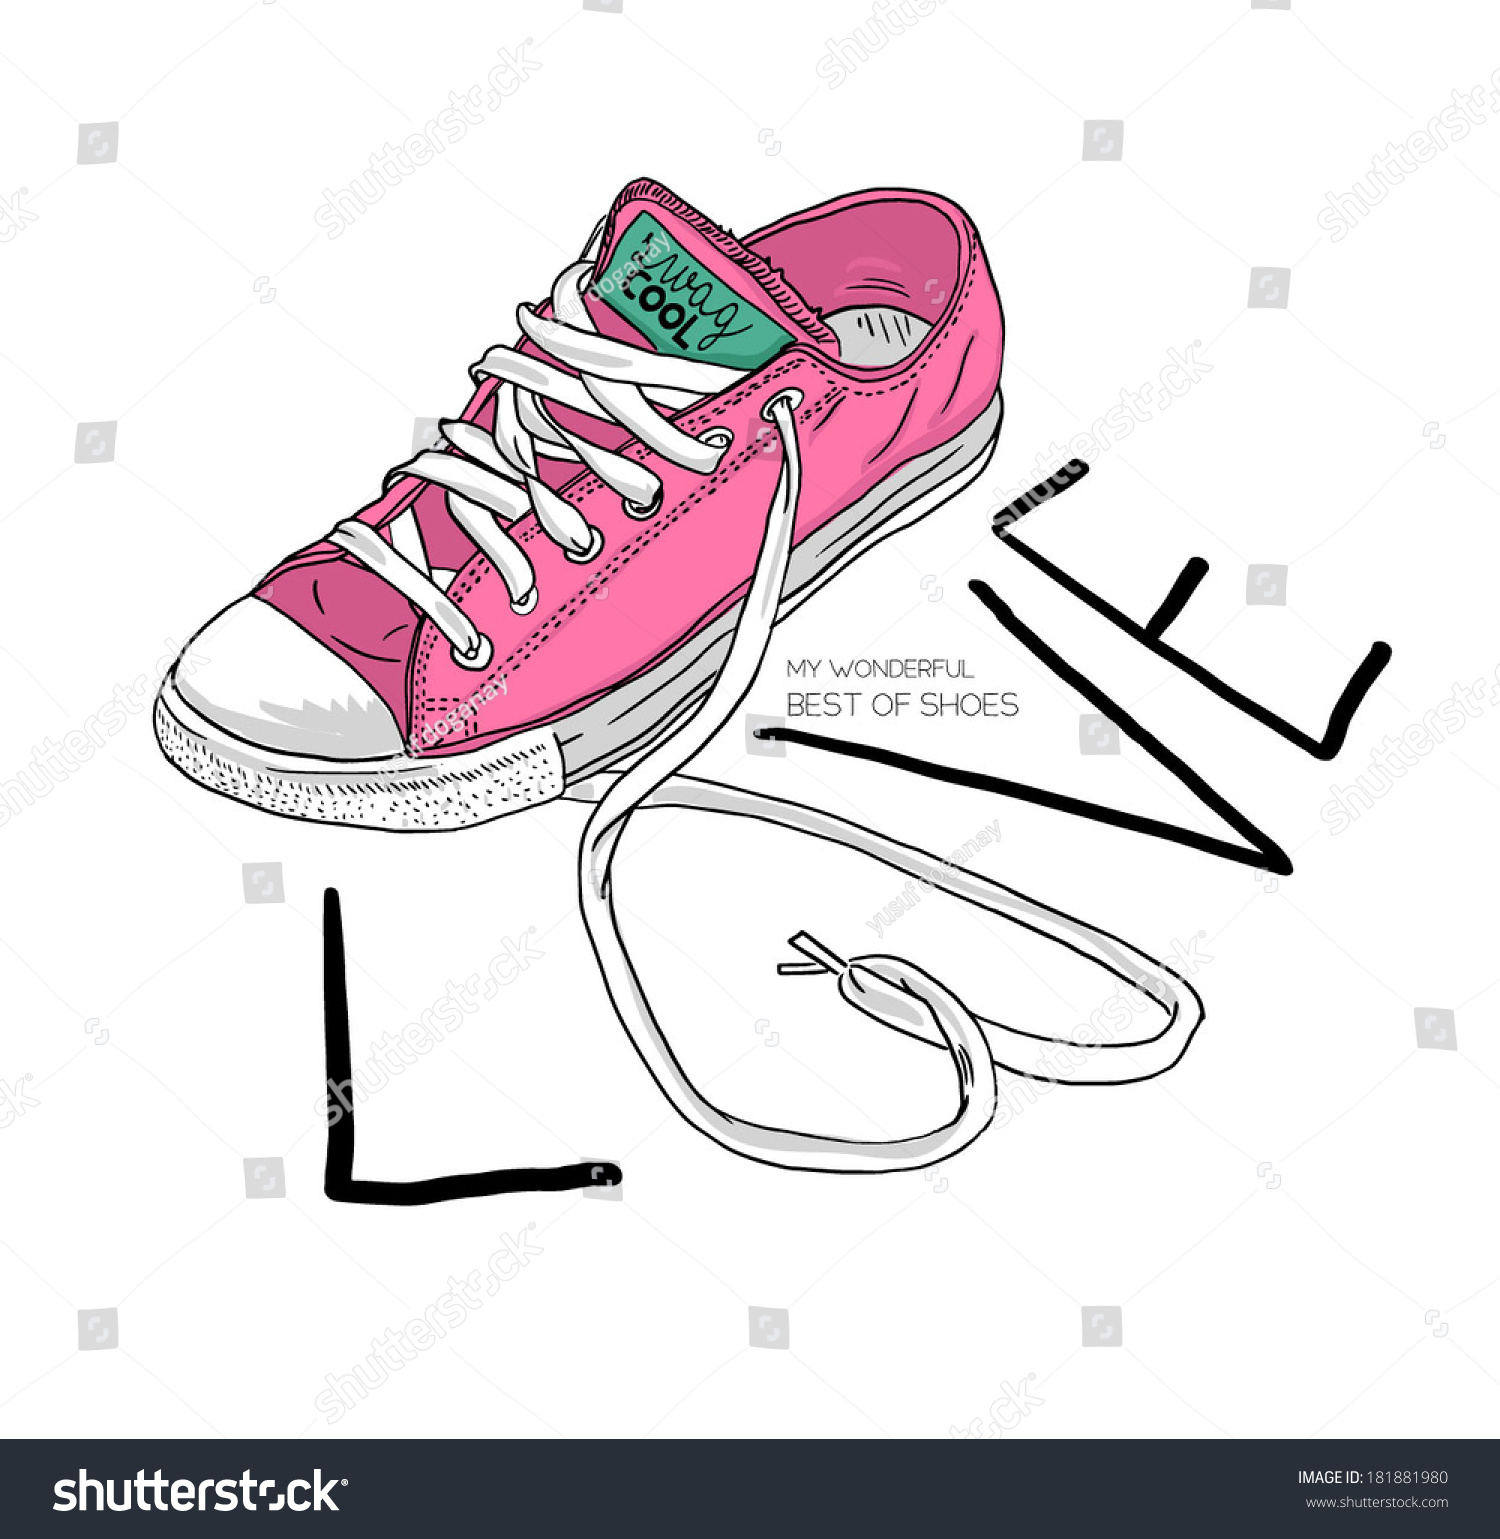 Fashion Sketch Illustration Shoes Love Type Stock Vector 181881980 ...